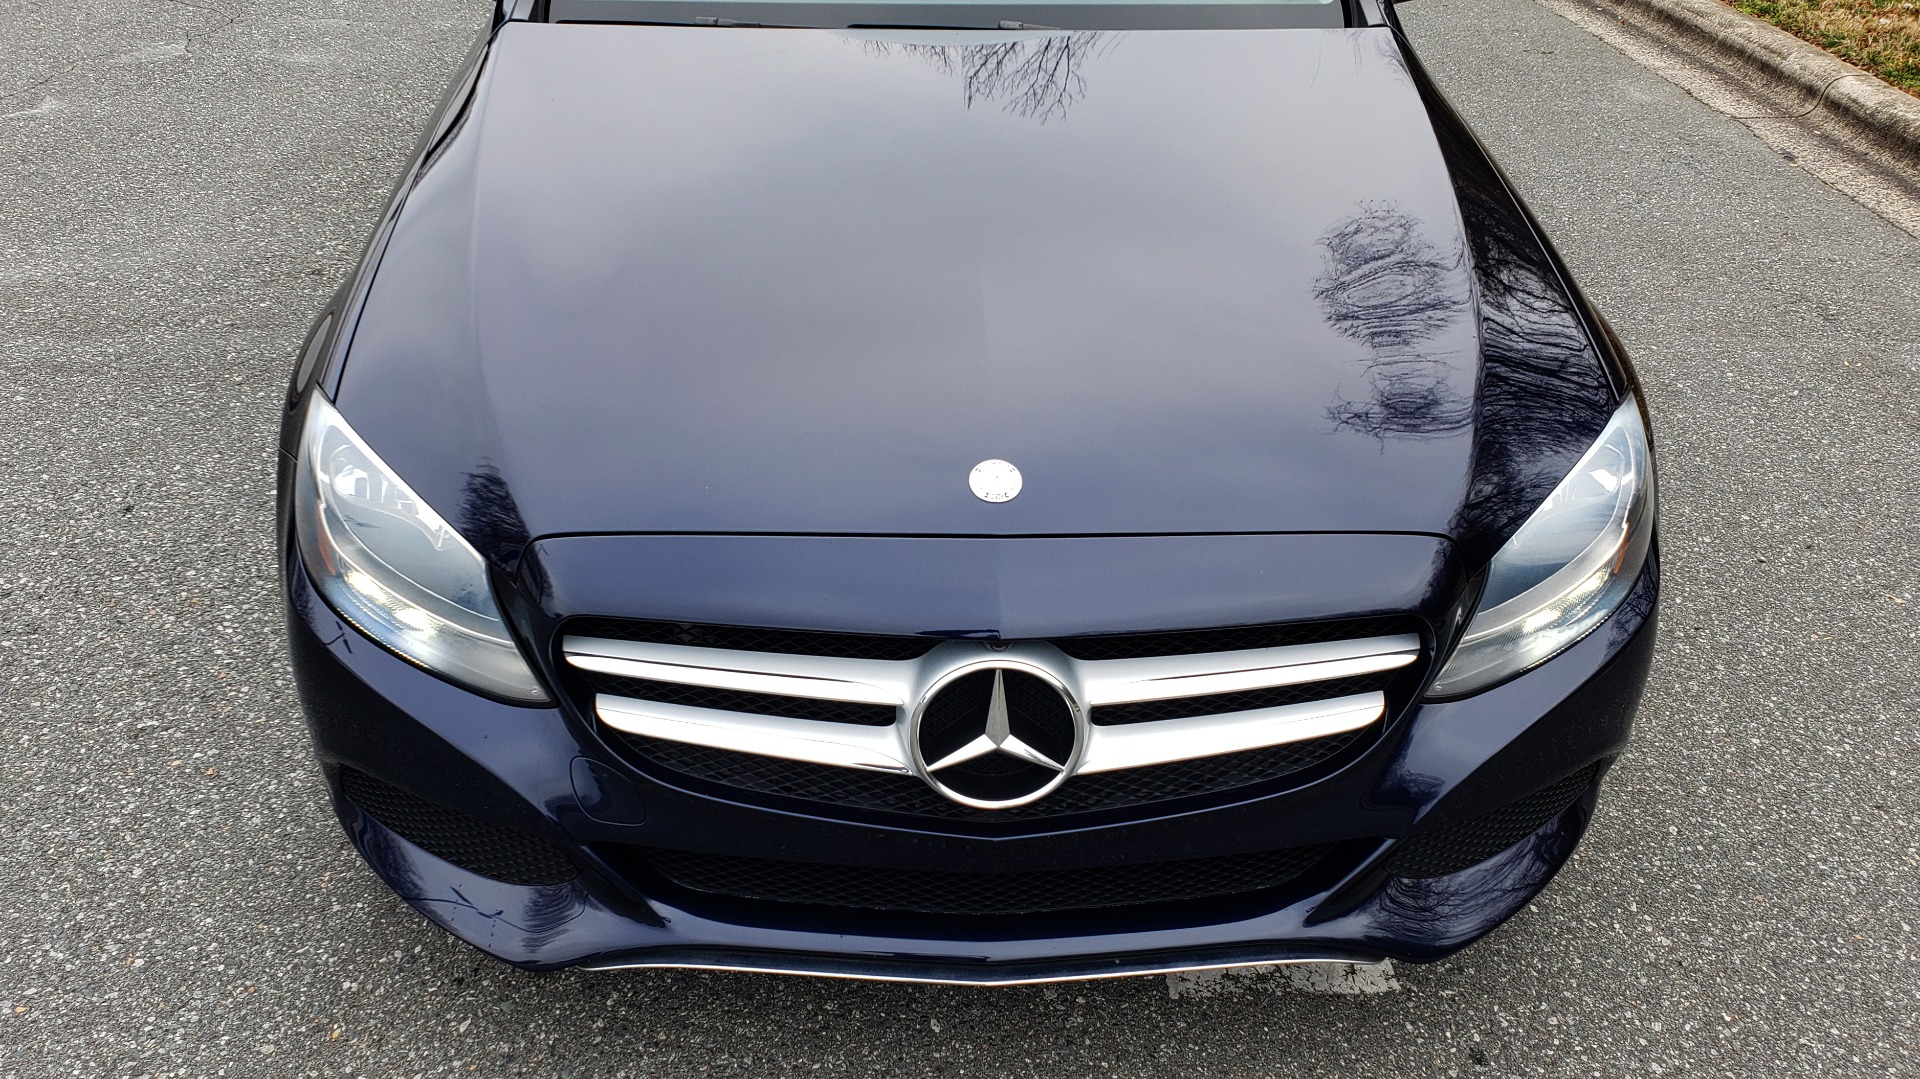 Used 2016 Mercedes-Benz C-CLASS C 300 / PREM PKG / PANO-ROOF / BSA / HTD STS / REARVIEW for sale Sold at Formula Imports in Charlotte NC 28227 13